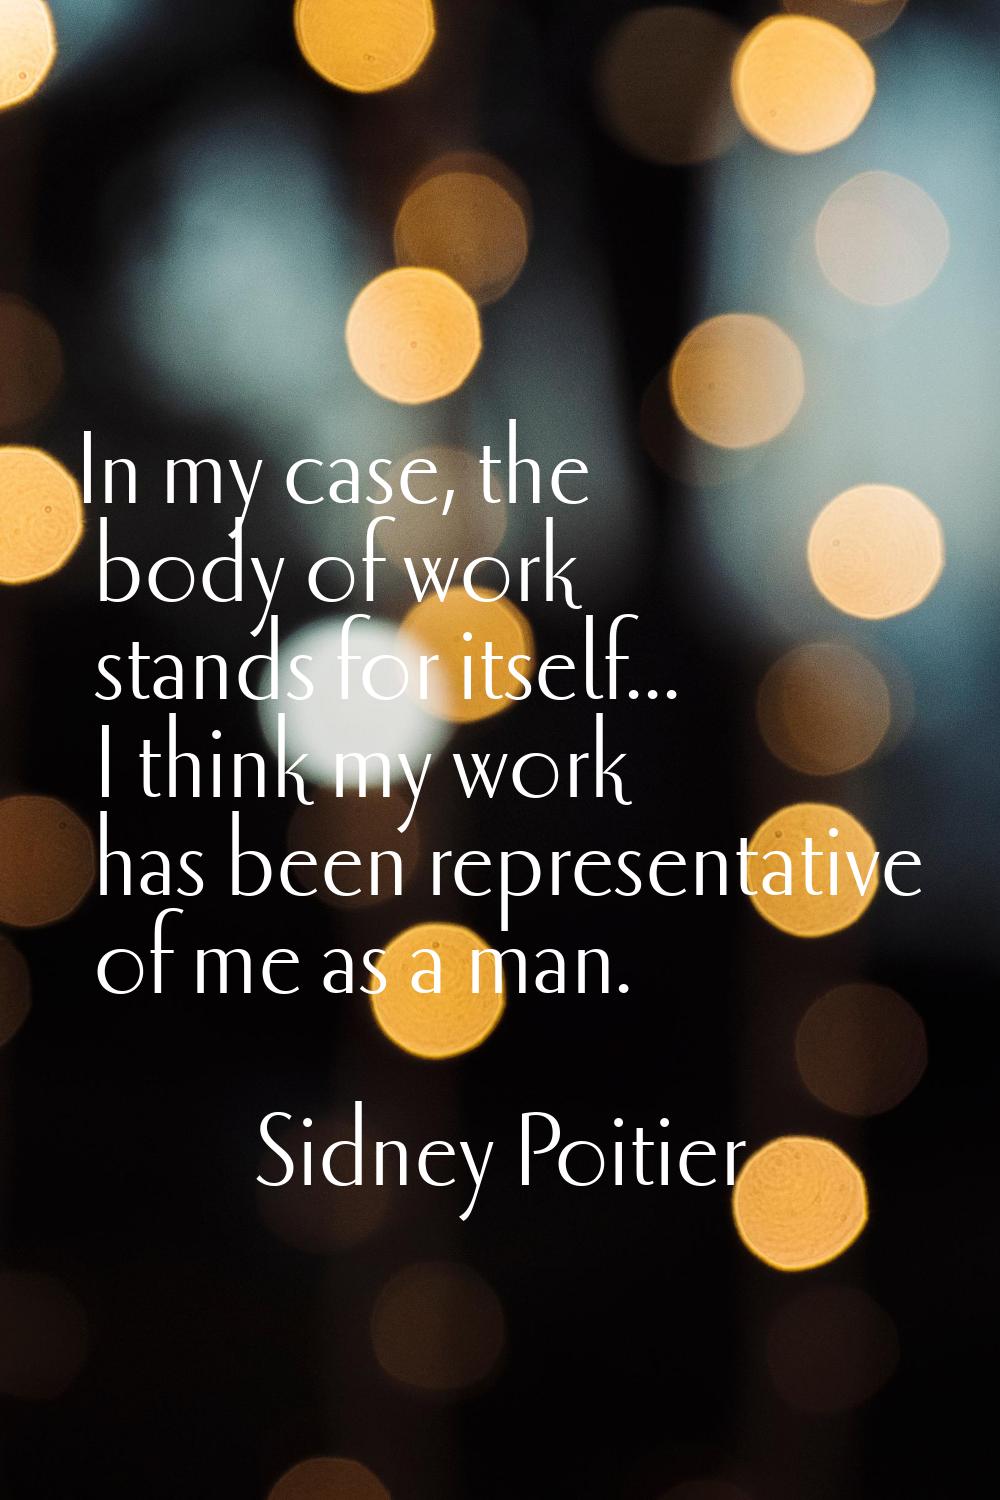 In my case, the body of work stands for itself... I think my work has been representative of me as 